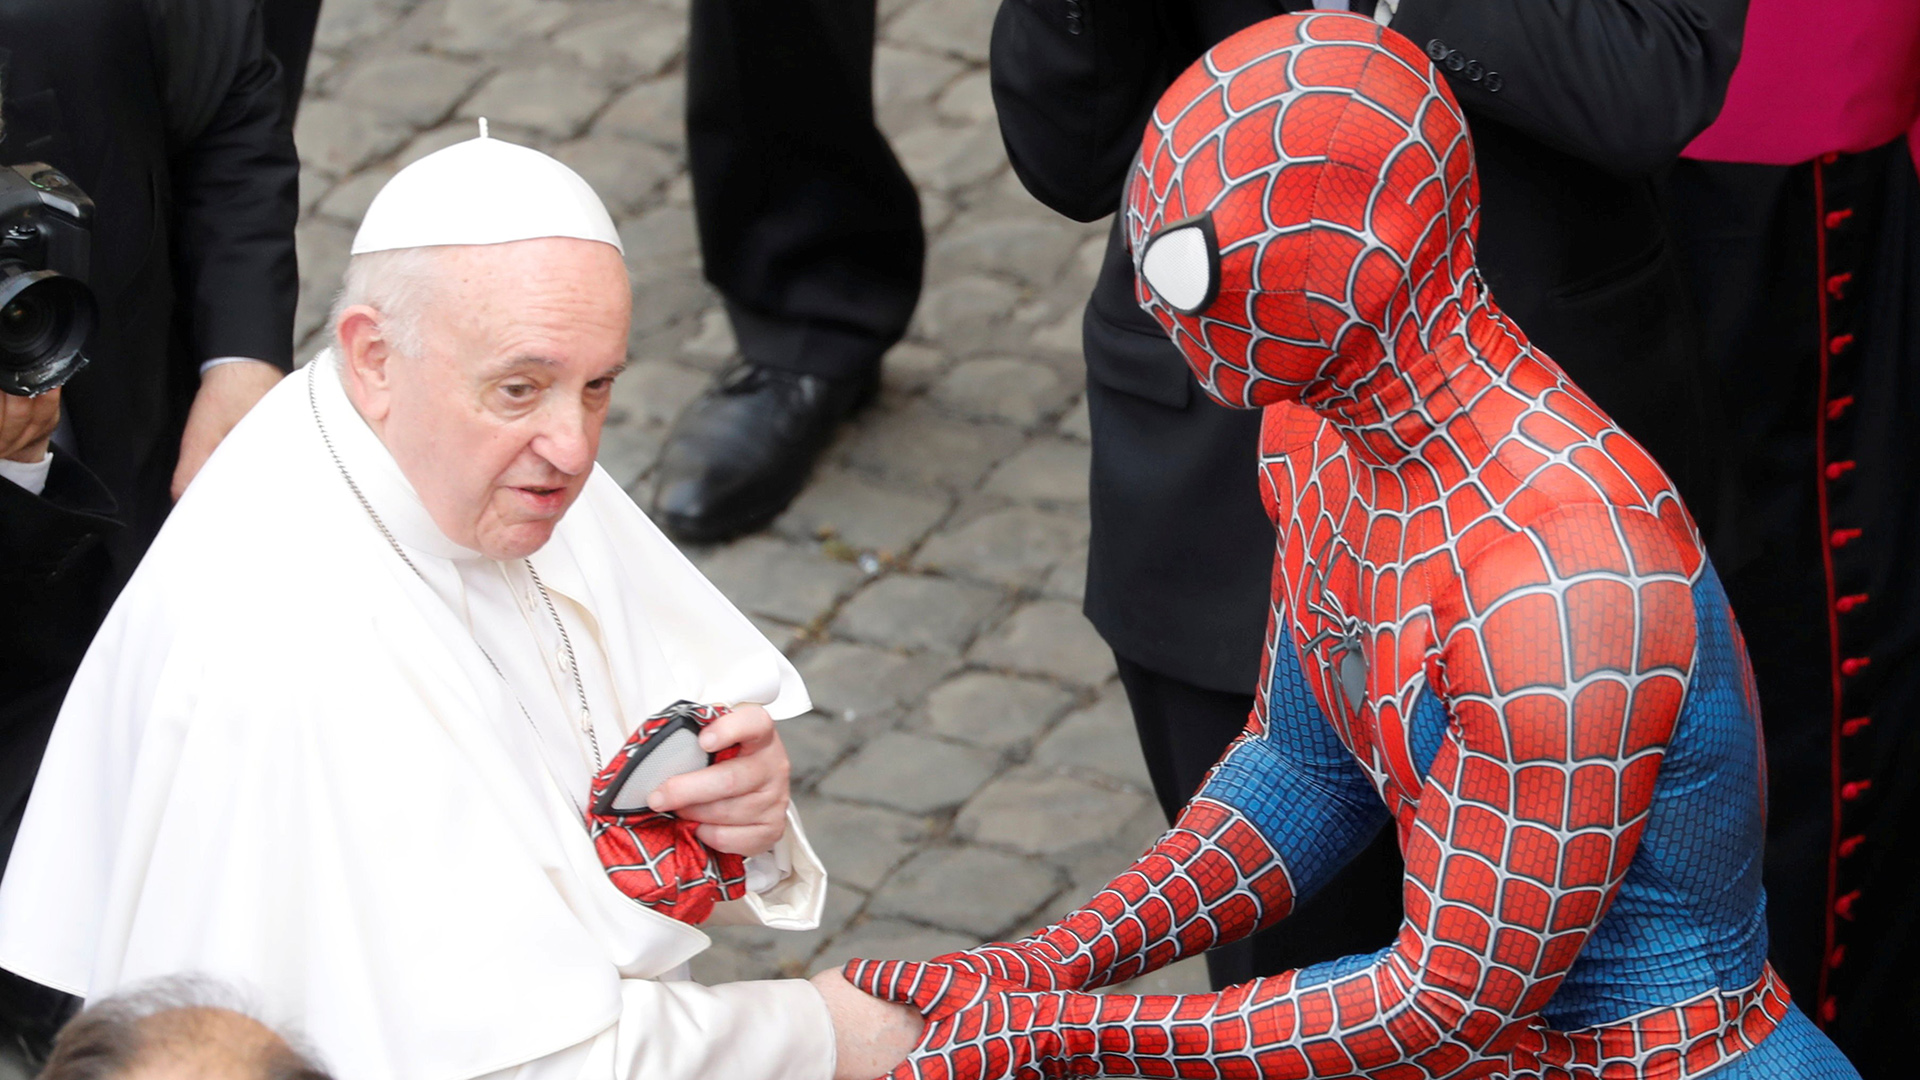 Spider-Man gifts Pope Francis a mask in viral meeting